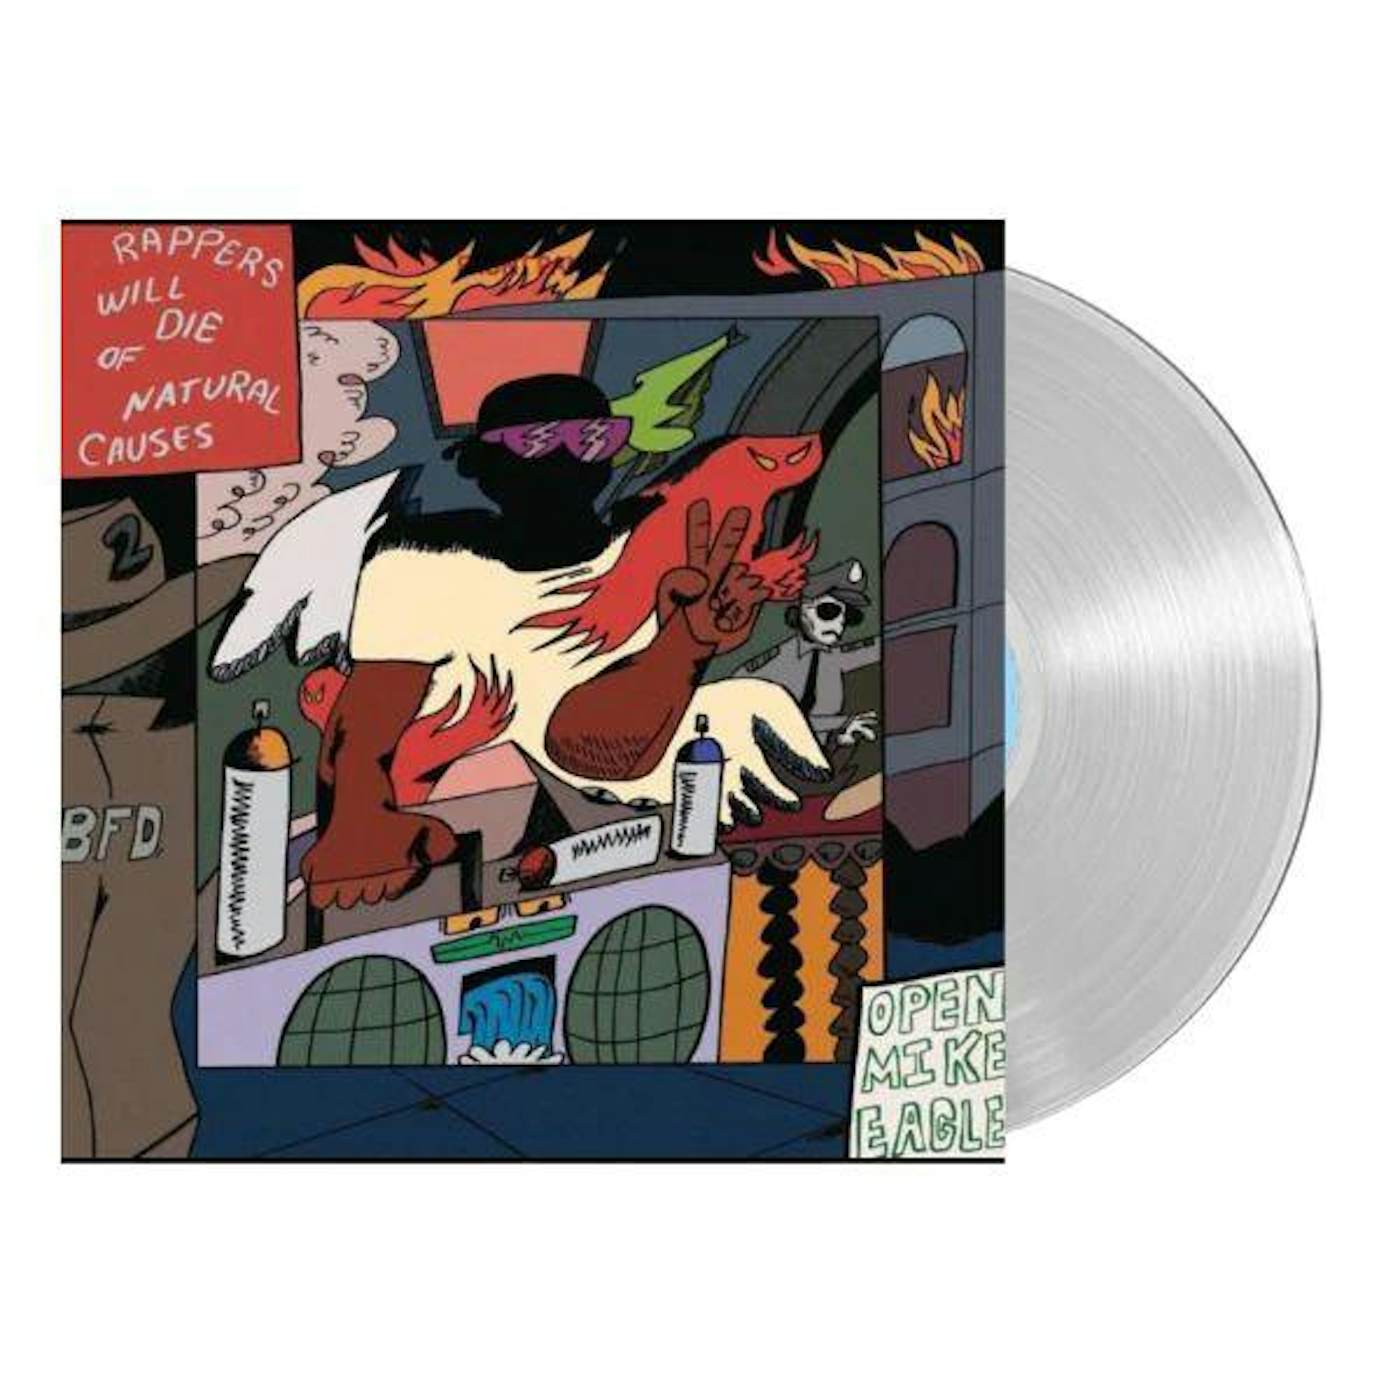 Open Mike Eagle Rappers Will Die Of Natural Causes (Silver Vinyl Record)